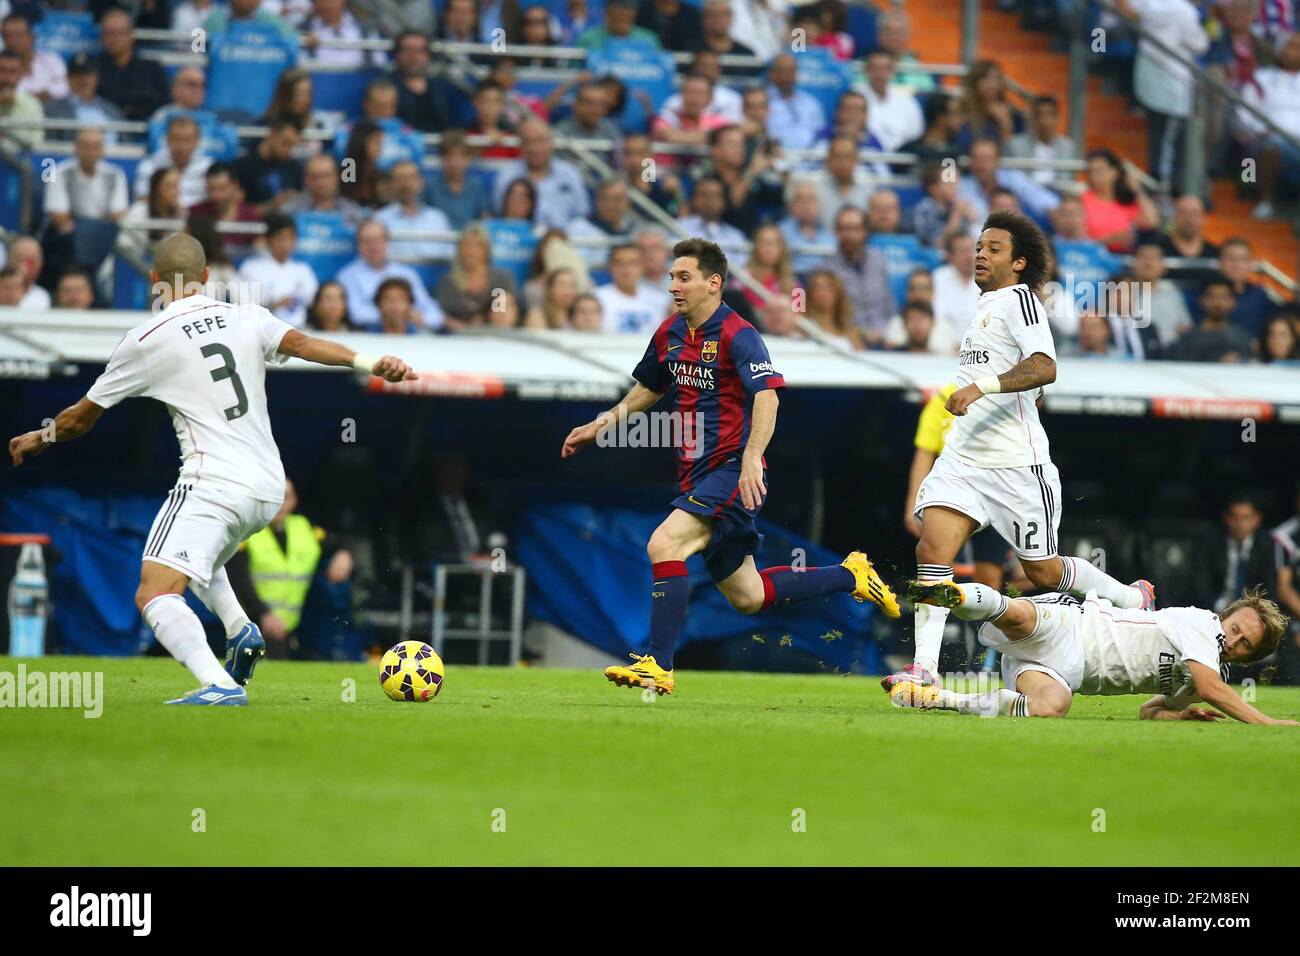 Lionel Messi of FC Barcelona evades Luka Modric of Real Madrid during the Spanish Championship Liga football match between Real Madrid CF and FC Barcelona, at Santiago Bernabeu Stadium in Madrid, Spain, on October 25, 2014. Photo Manuel Blondeau / AOP.press / DPPI Stock Photo